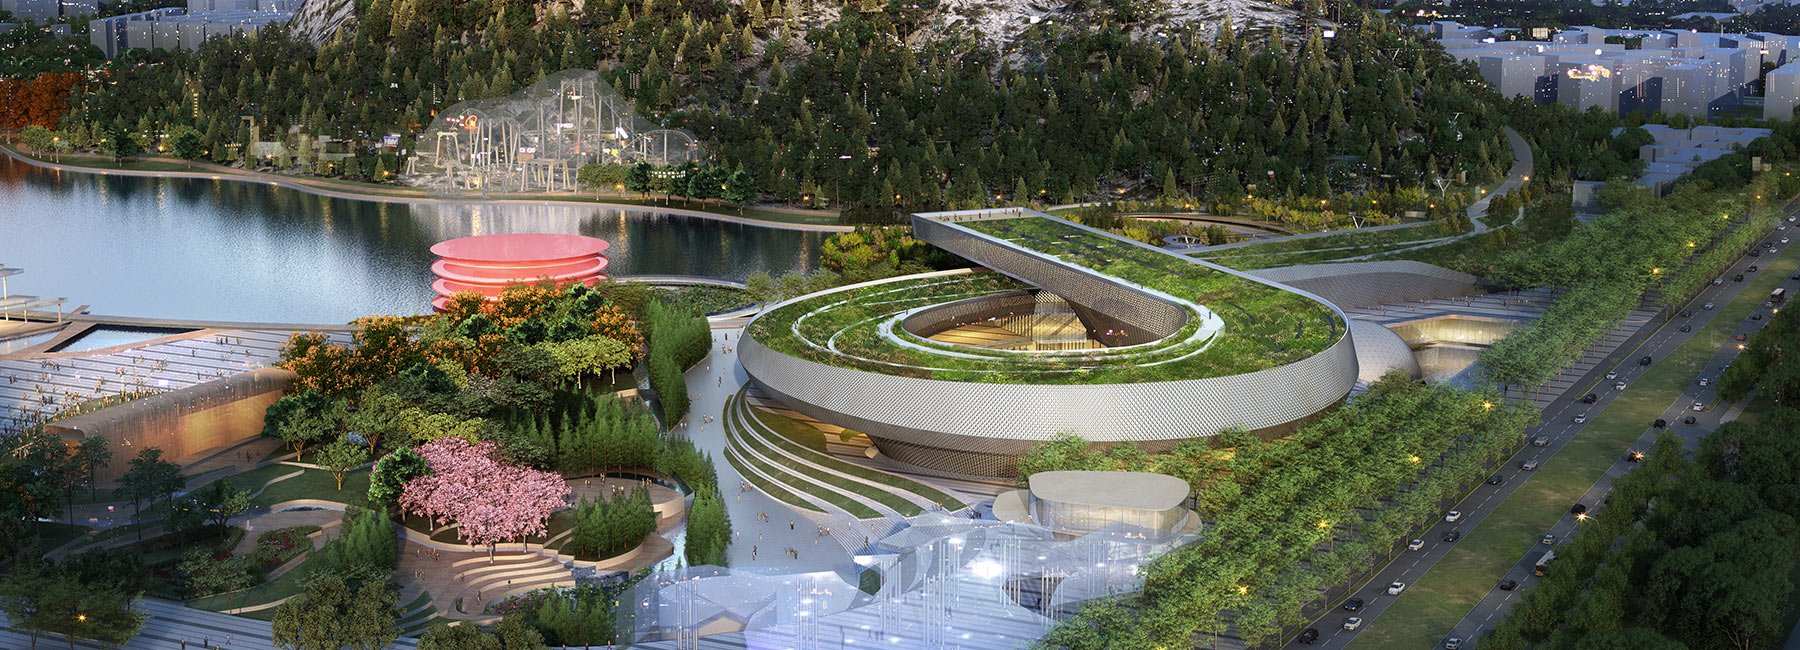 perkins + will unveils plans for suzhou science & technology museum in china